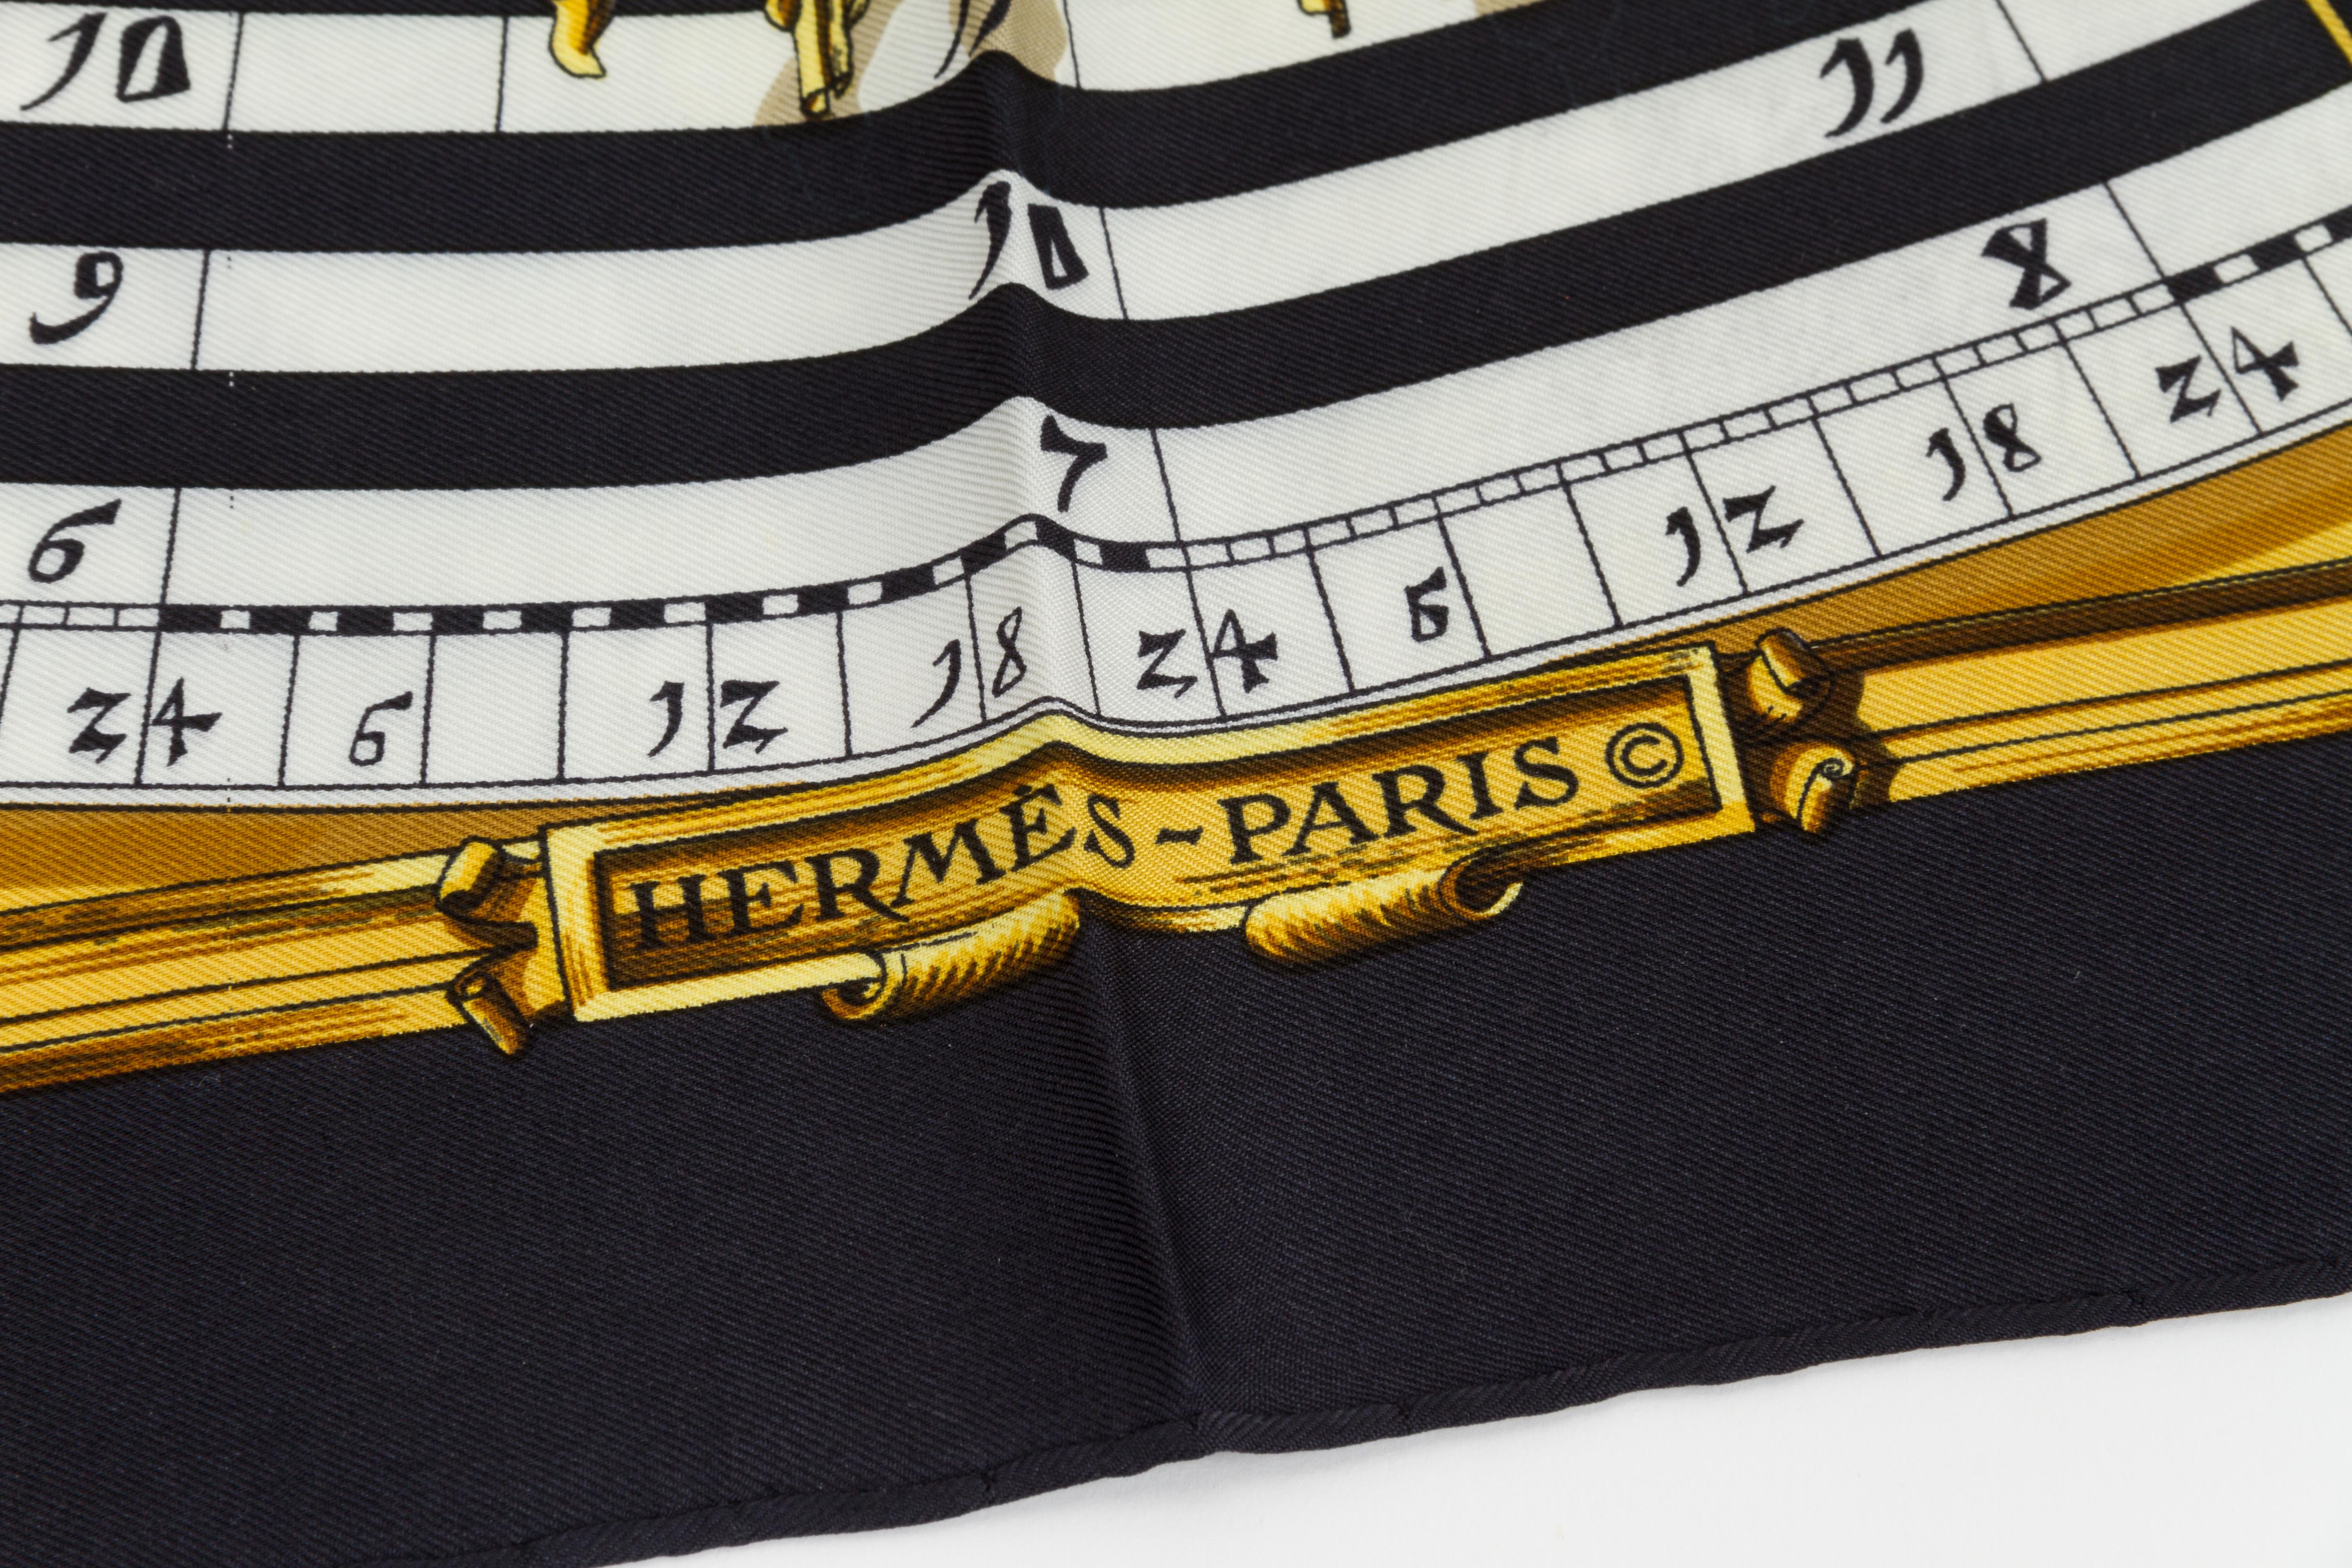 Hermes silk twill Astrologie scarf in black with white and gold accents. Hand-rolled edges. Minor wear.